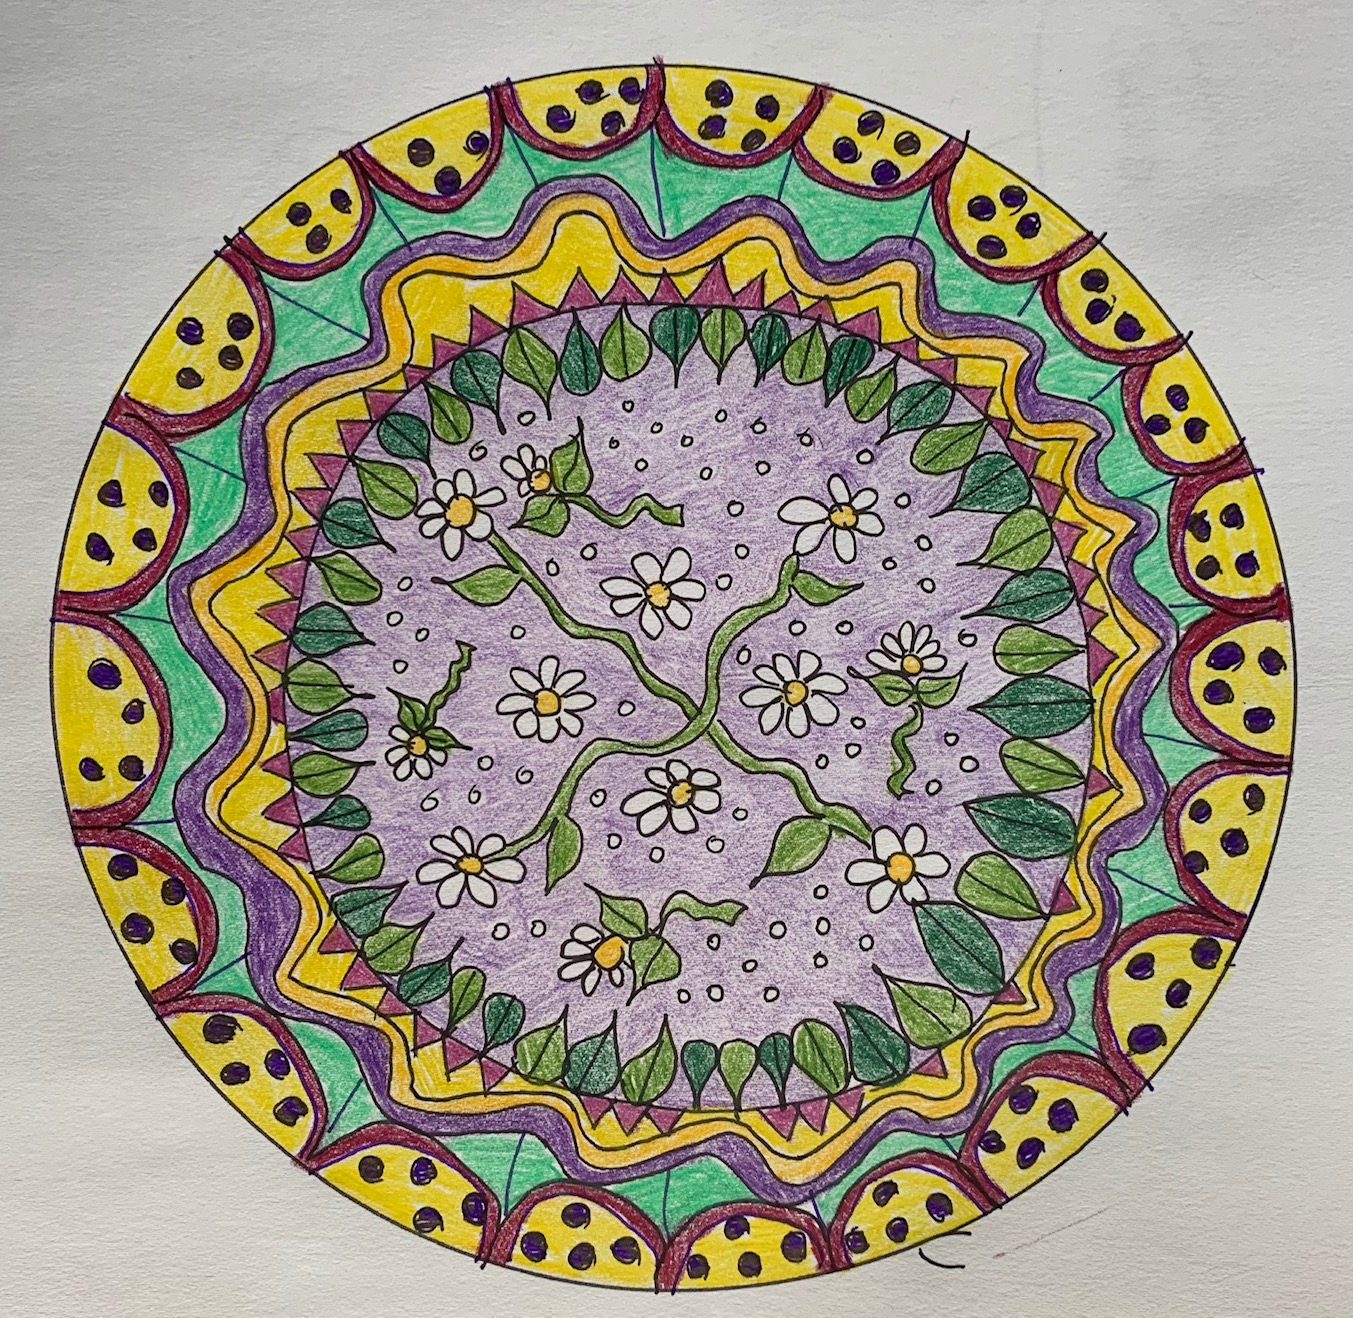 circular mandala design with flowers, colored using shades of green, purple and yellow